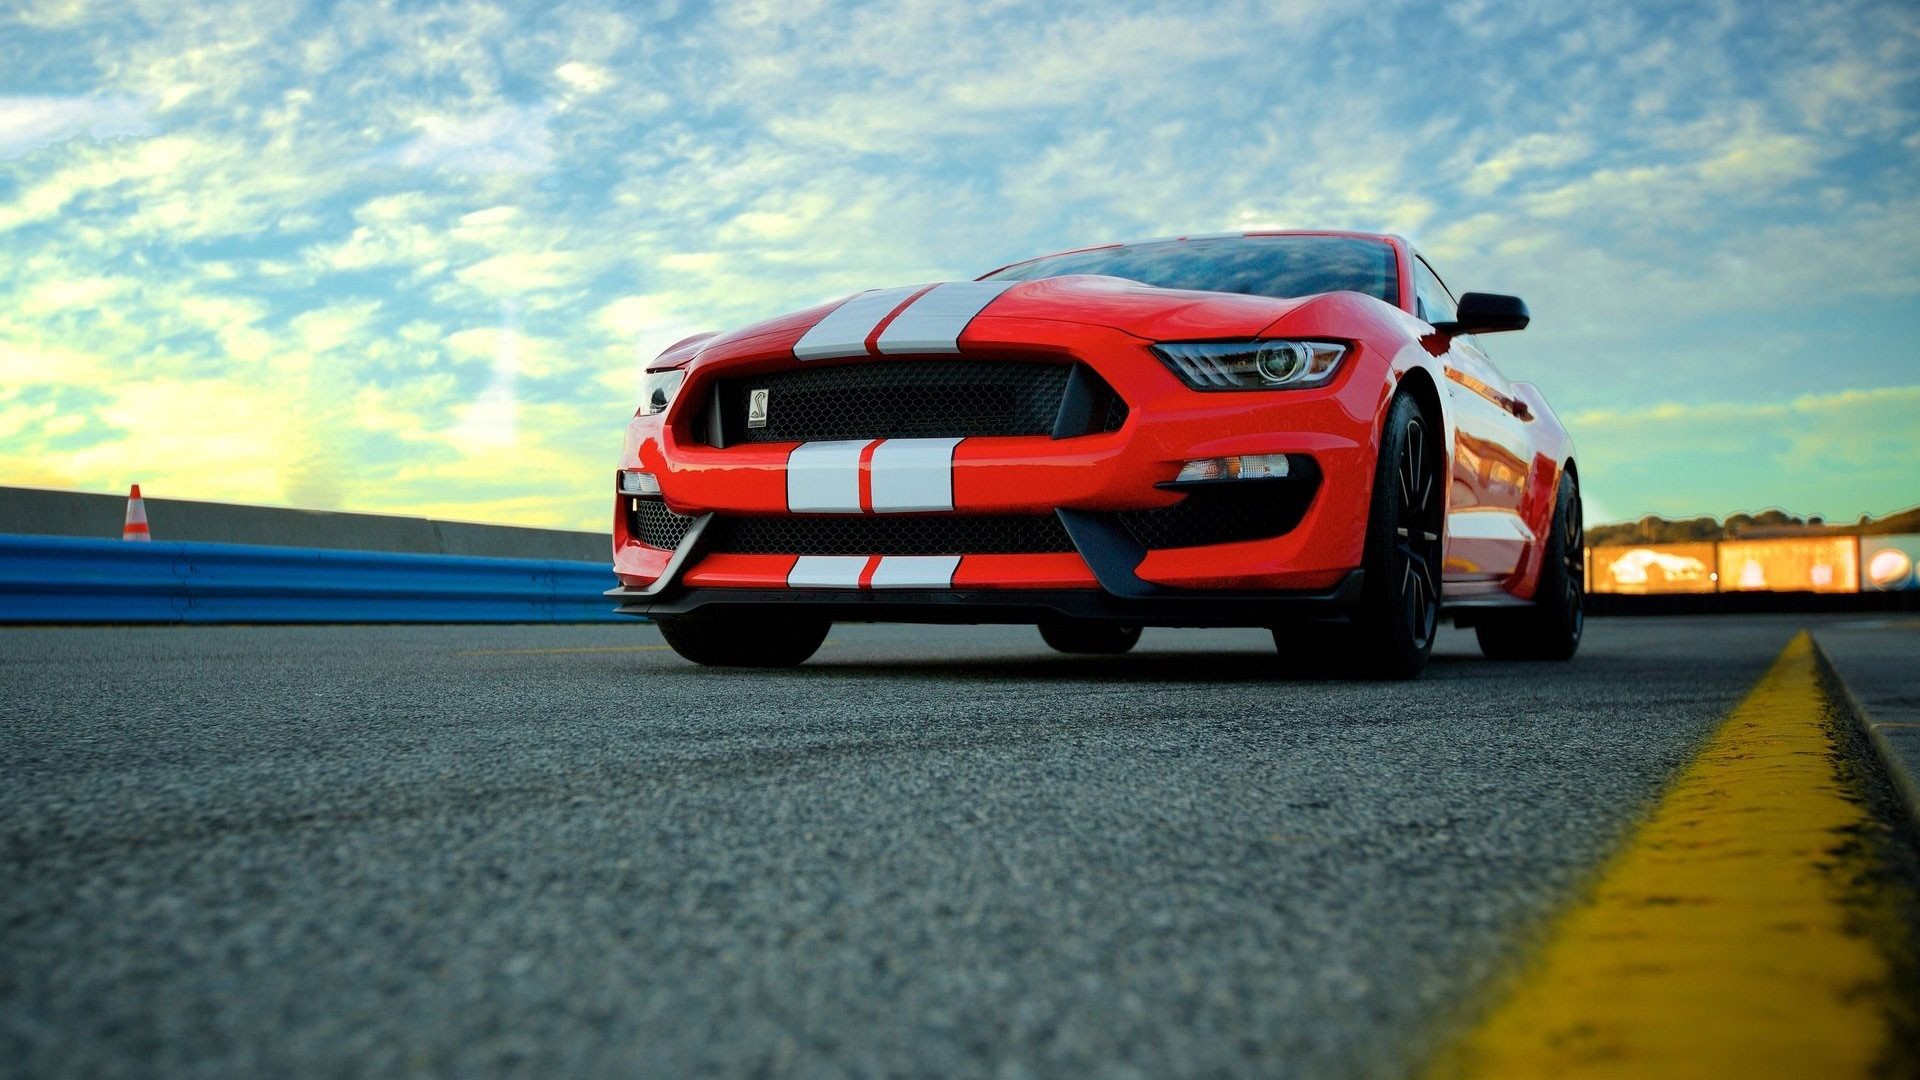 Red Ford Mustang Shelby Gt350 Hd Wallpapers - Fondos De Pantalla Ford Mustang Hd - HD Wallpaper 